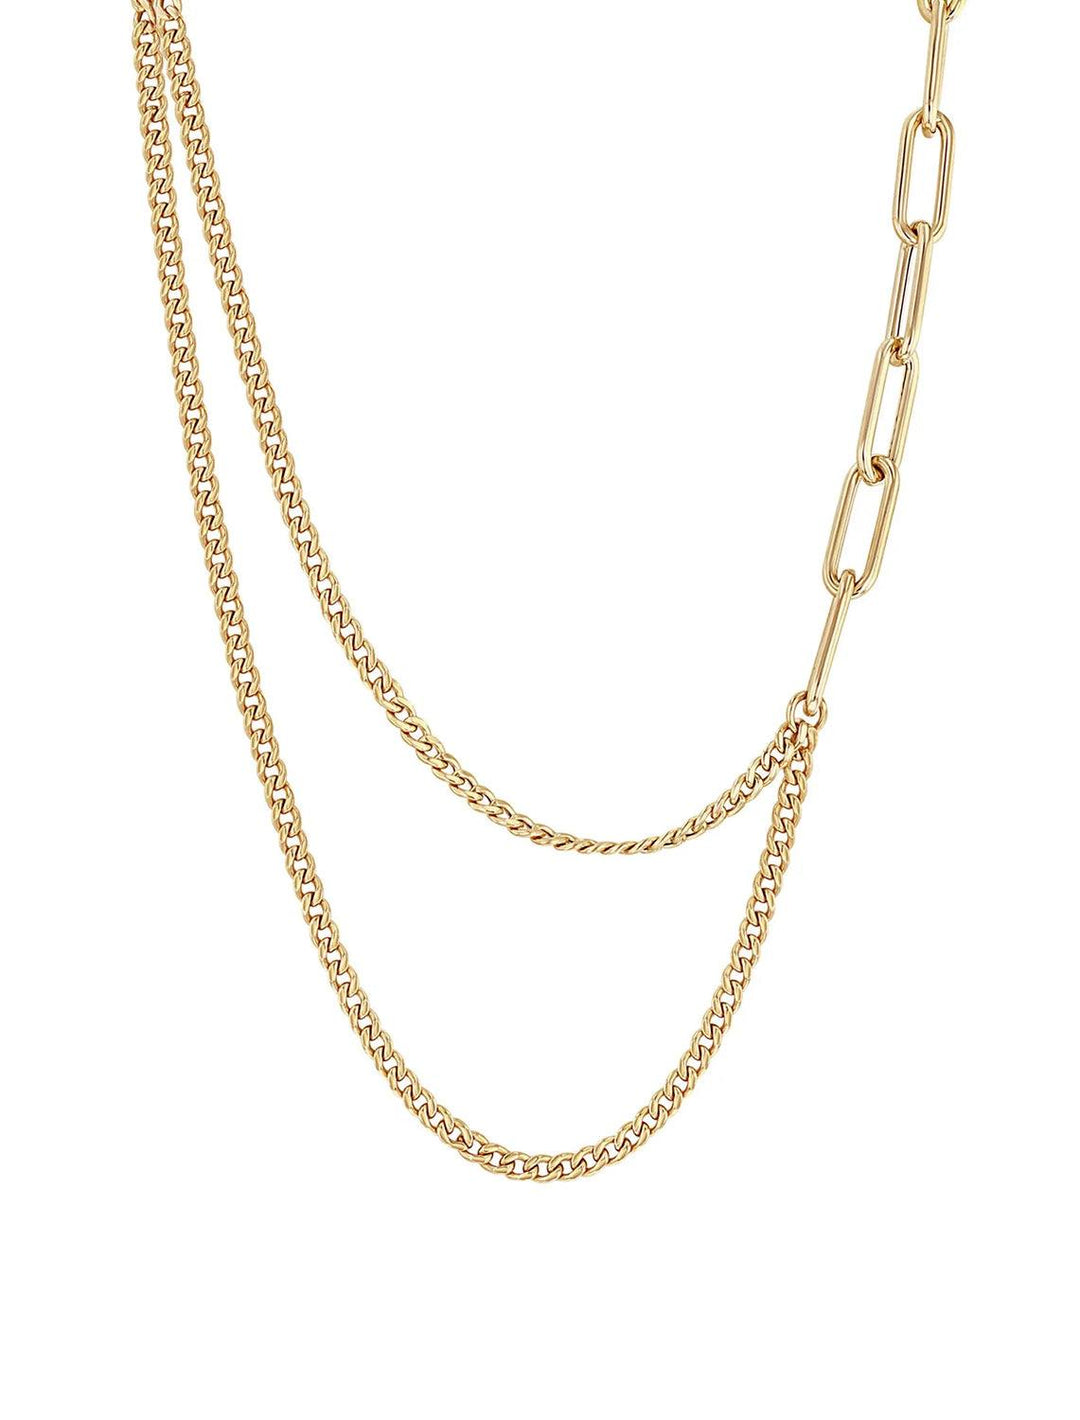 Front view of Zoe Chicco's 14K Asymmetric Layered Curb and Paperclip Chain Necklace in Gold.